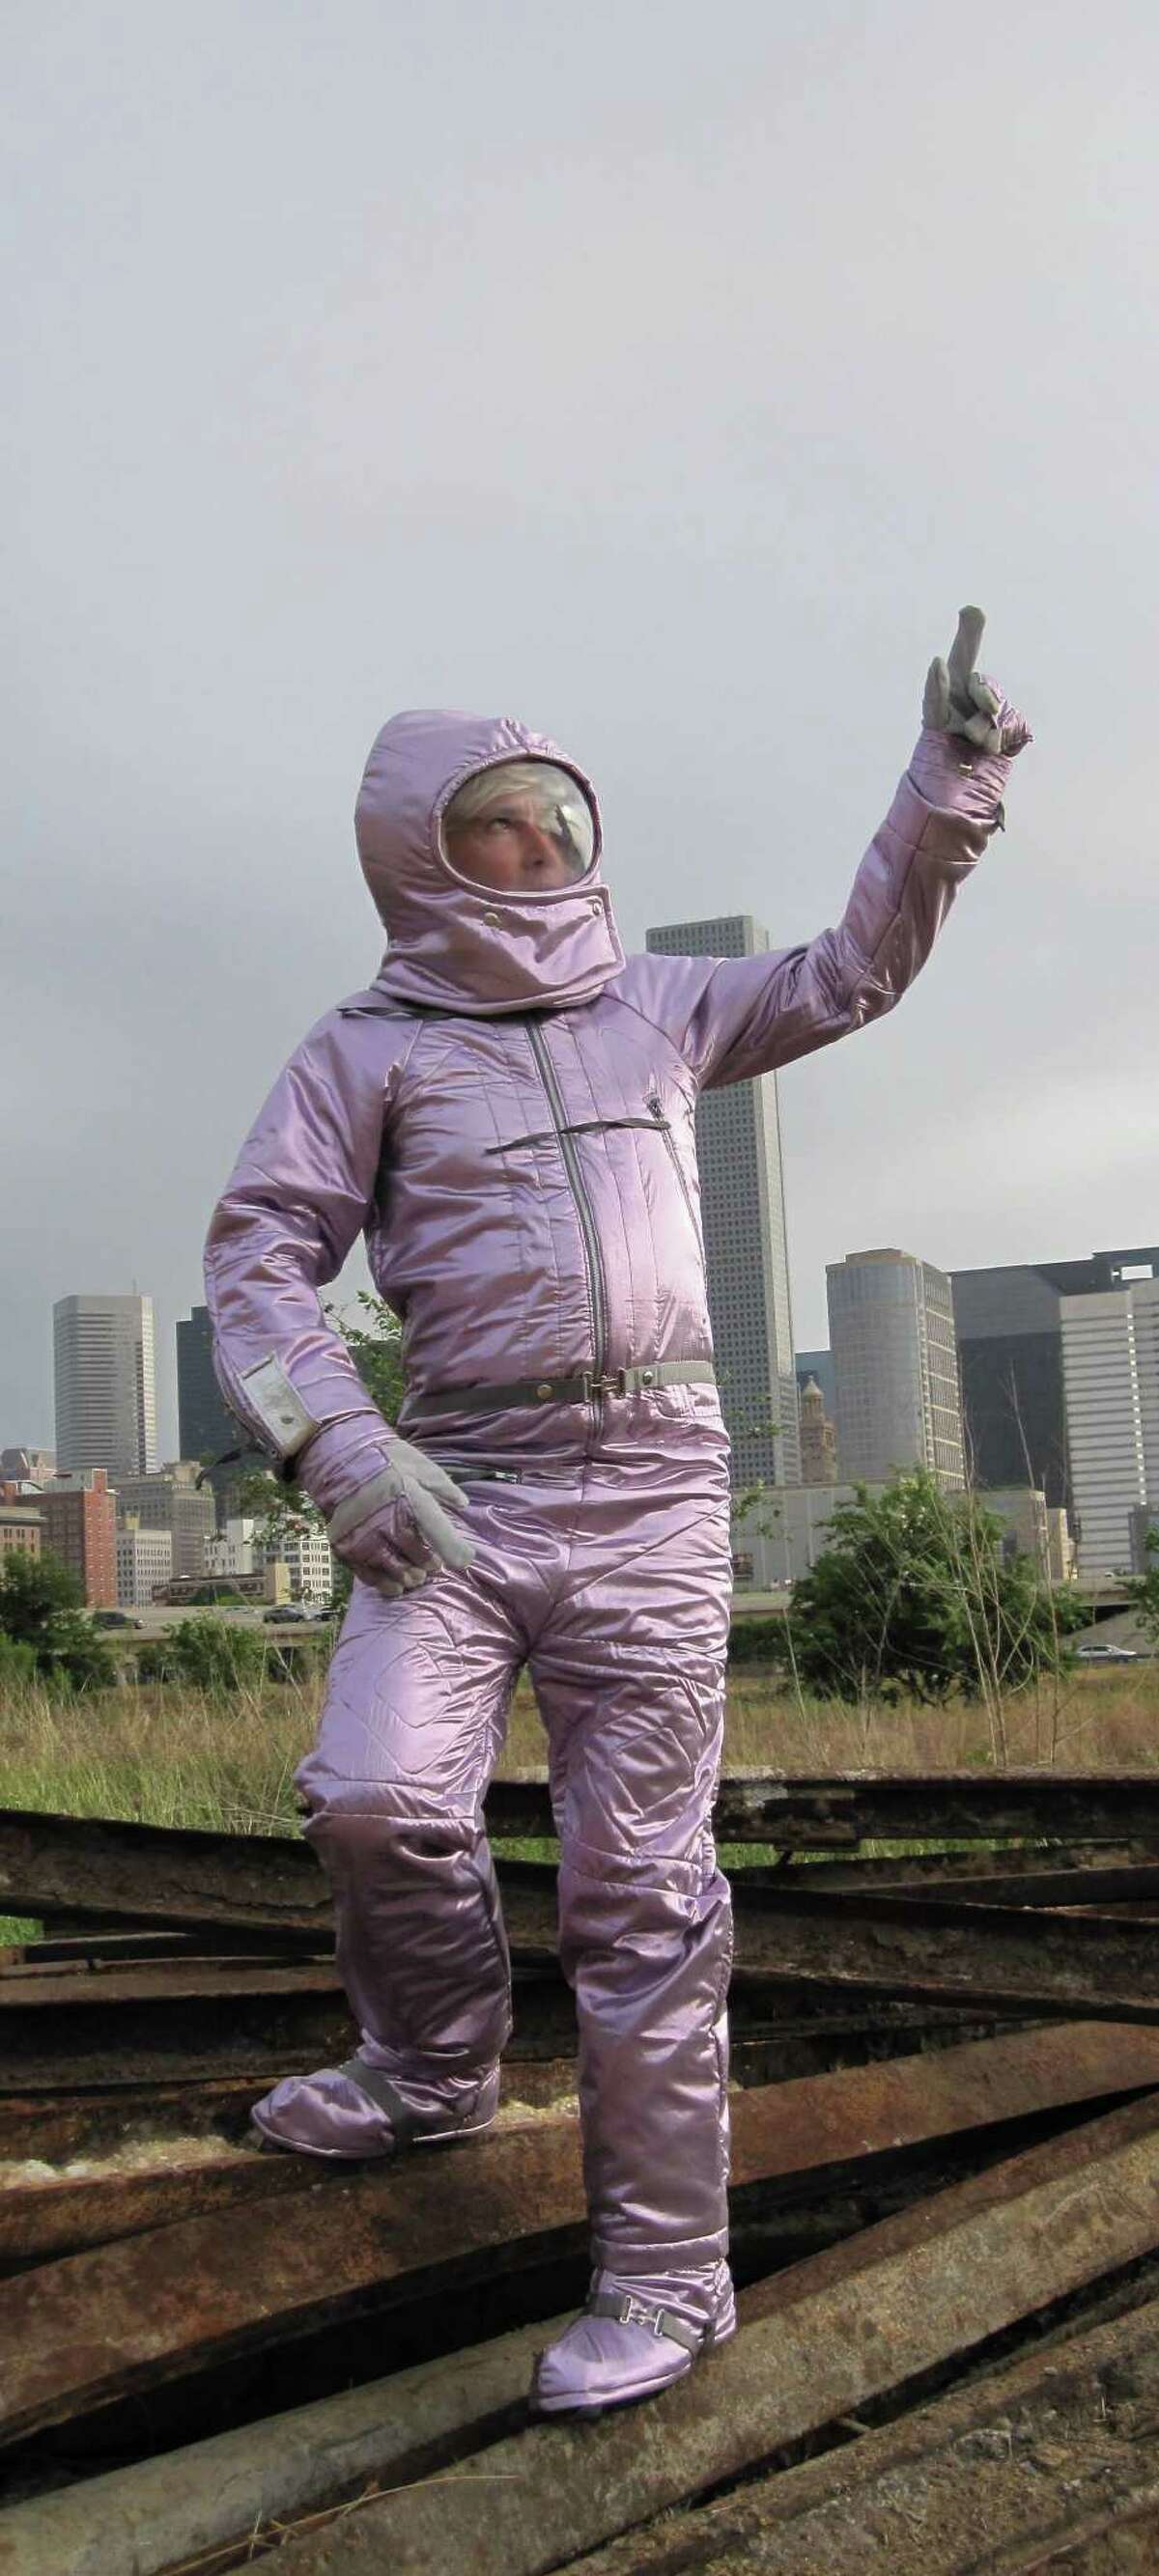 Houston artist Nance wears his award-winning pink spacesuit costume in an image that will appear this fall on signs near the Hilton-Americas Houston and Toyota Center.